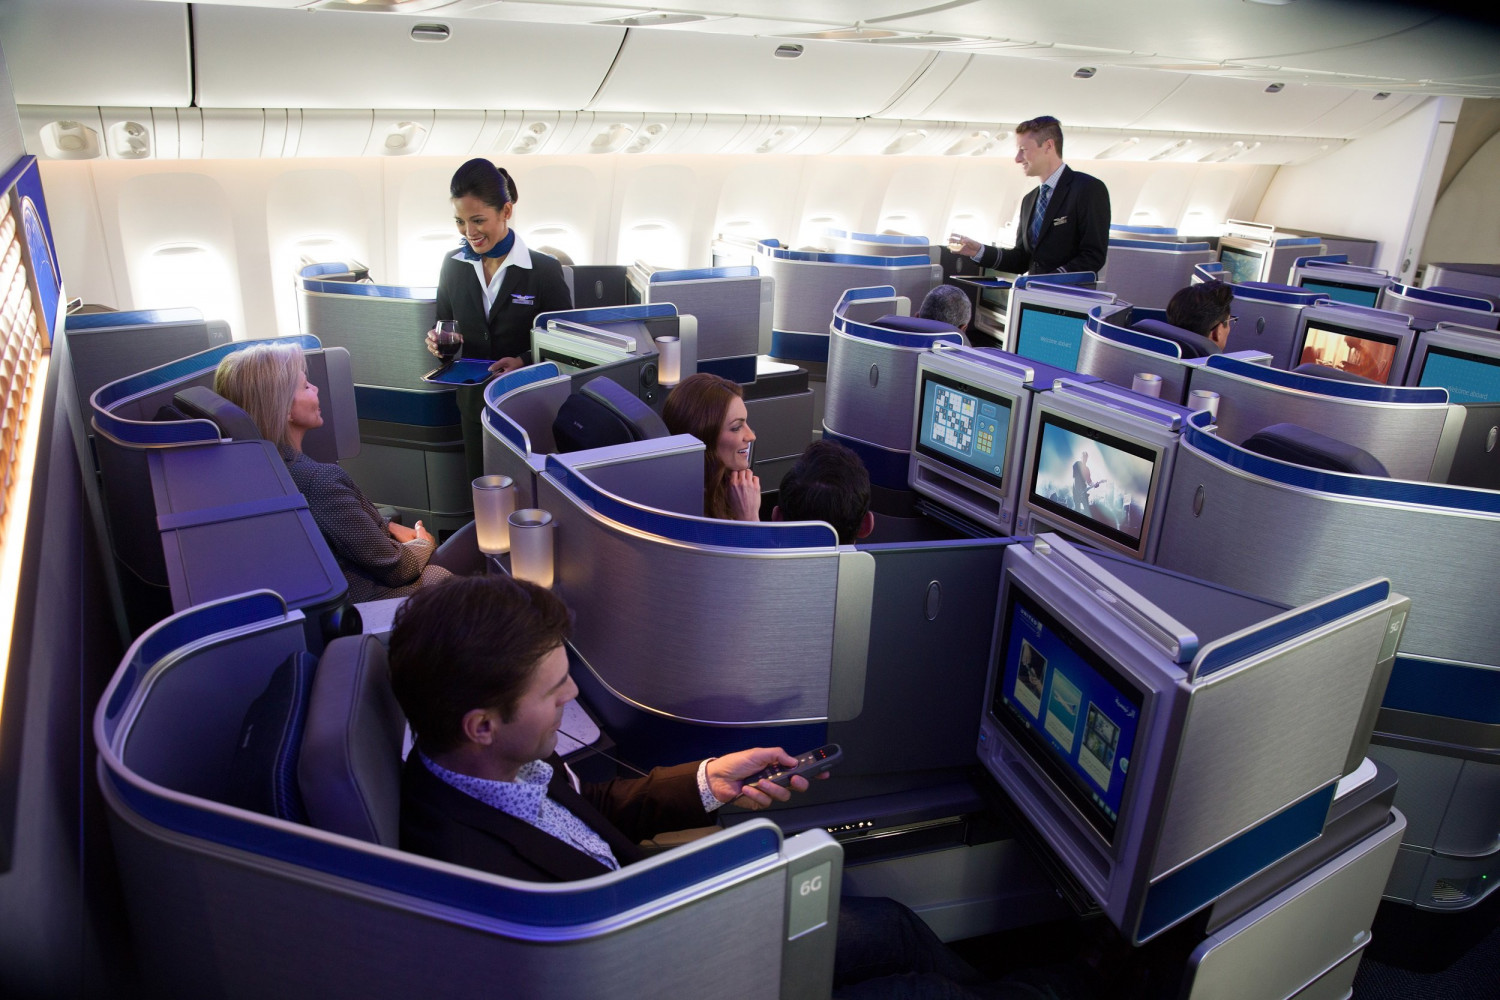 United Airlines Covers Inflight Entertainment Cameras Due to Privacy Concerns